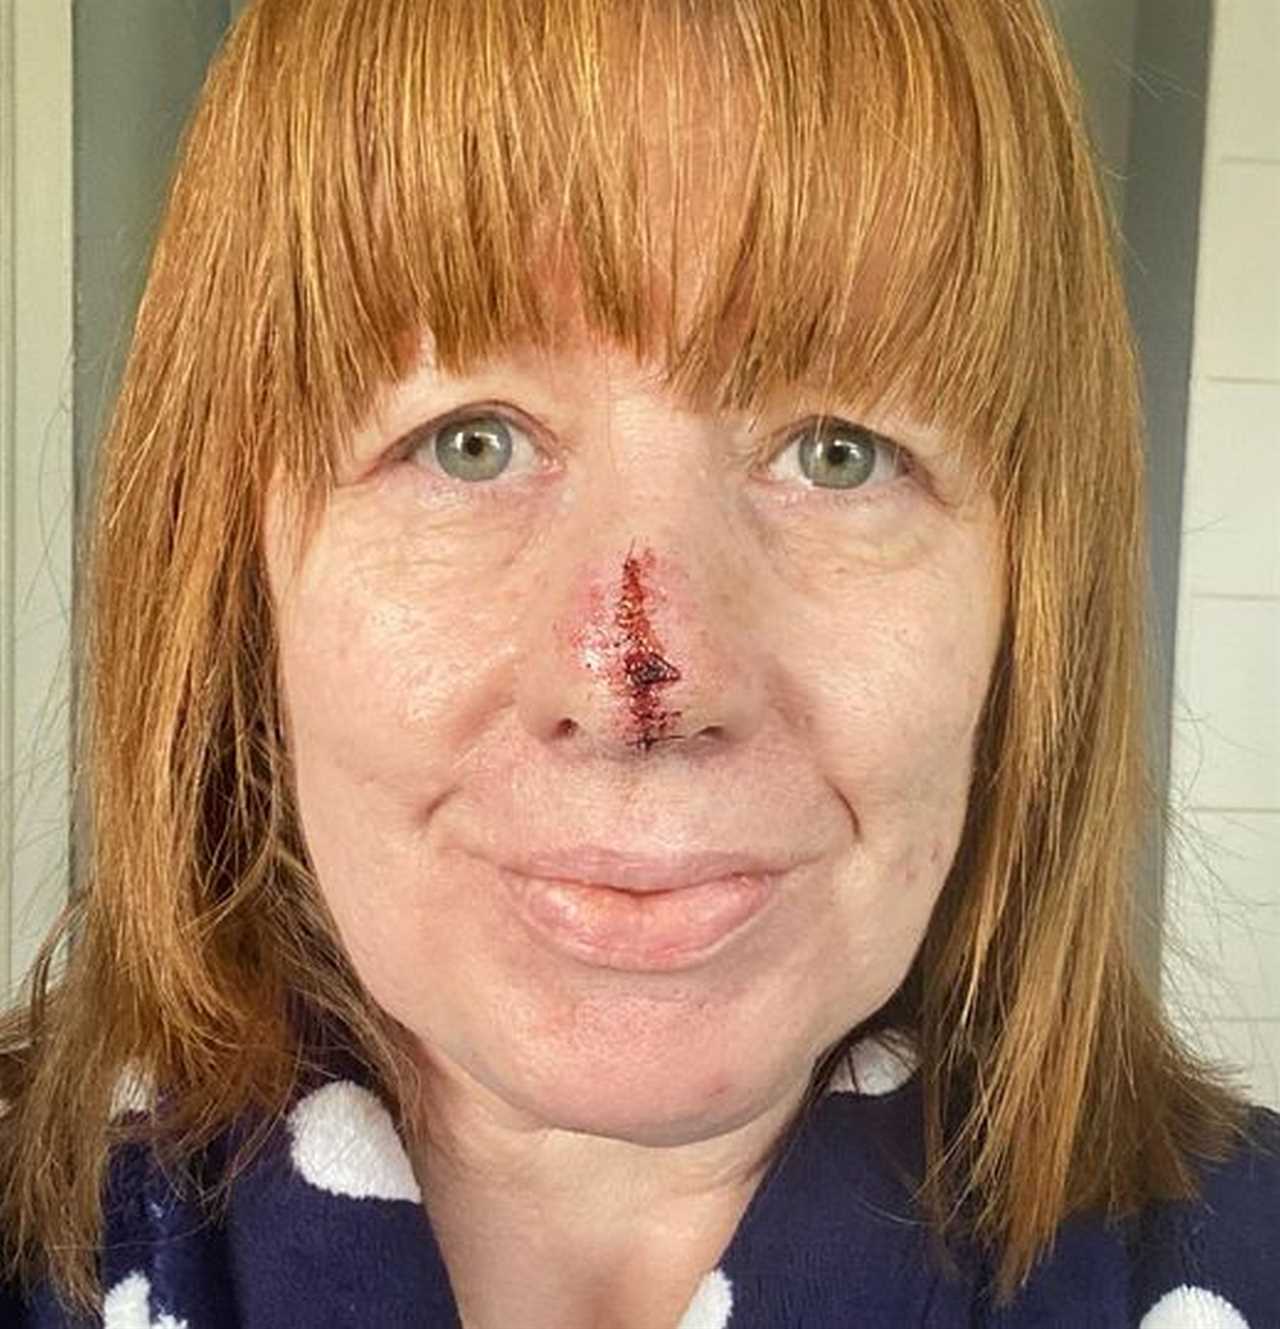 Mum Loses Part of Nose After Cancer Misdiagnosis